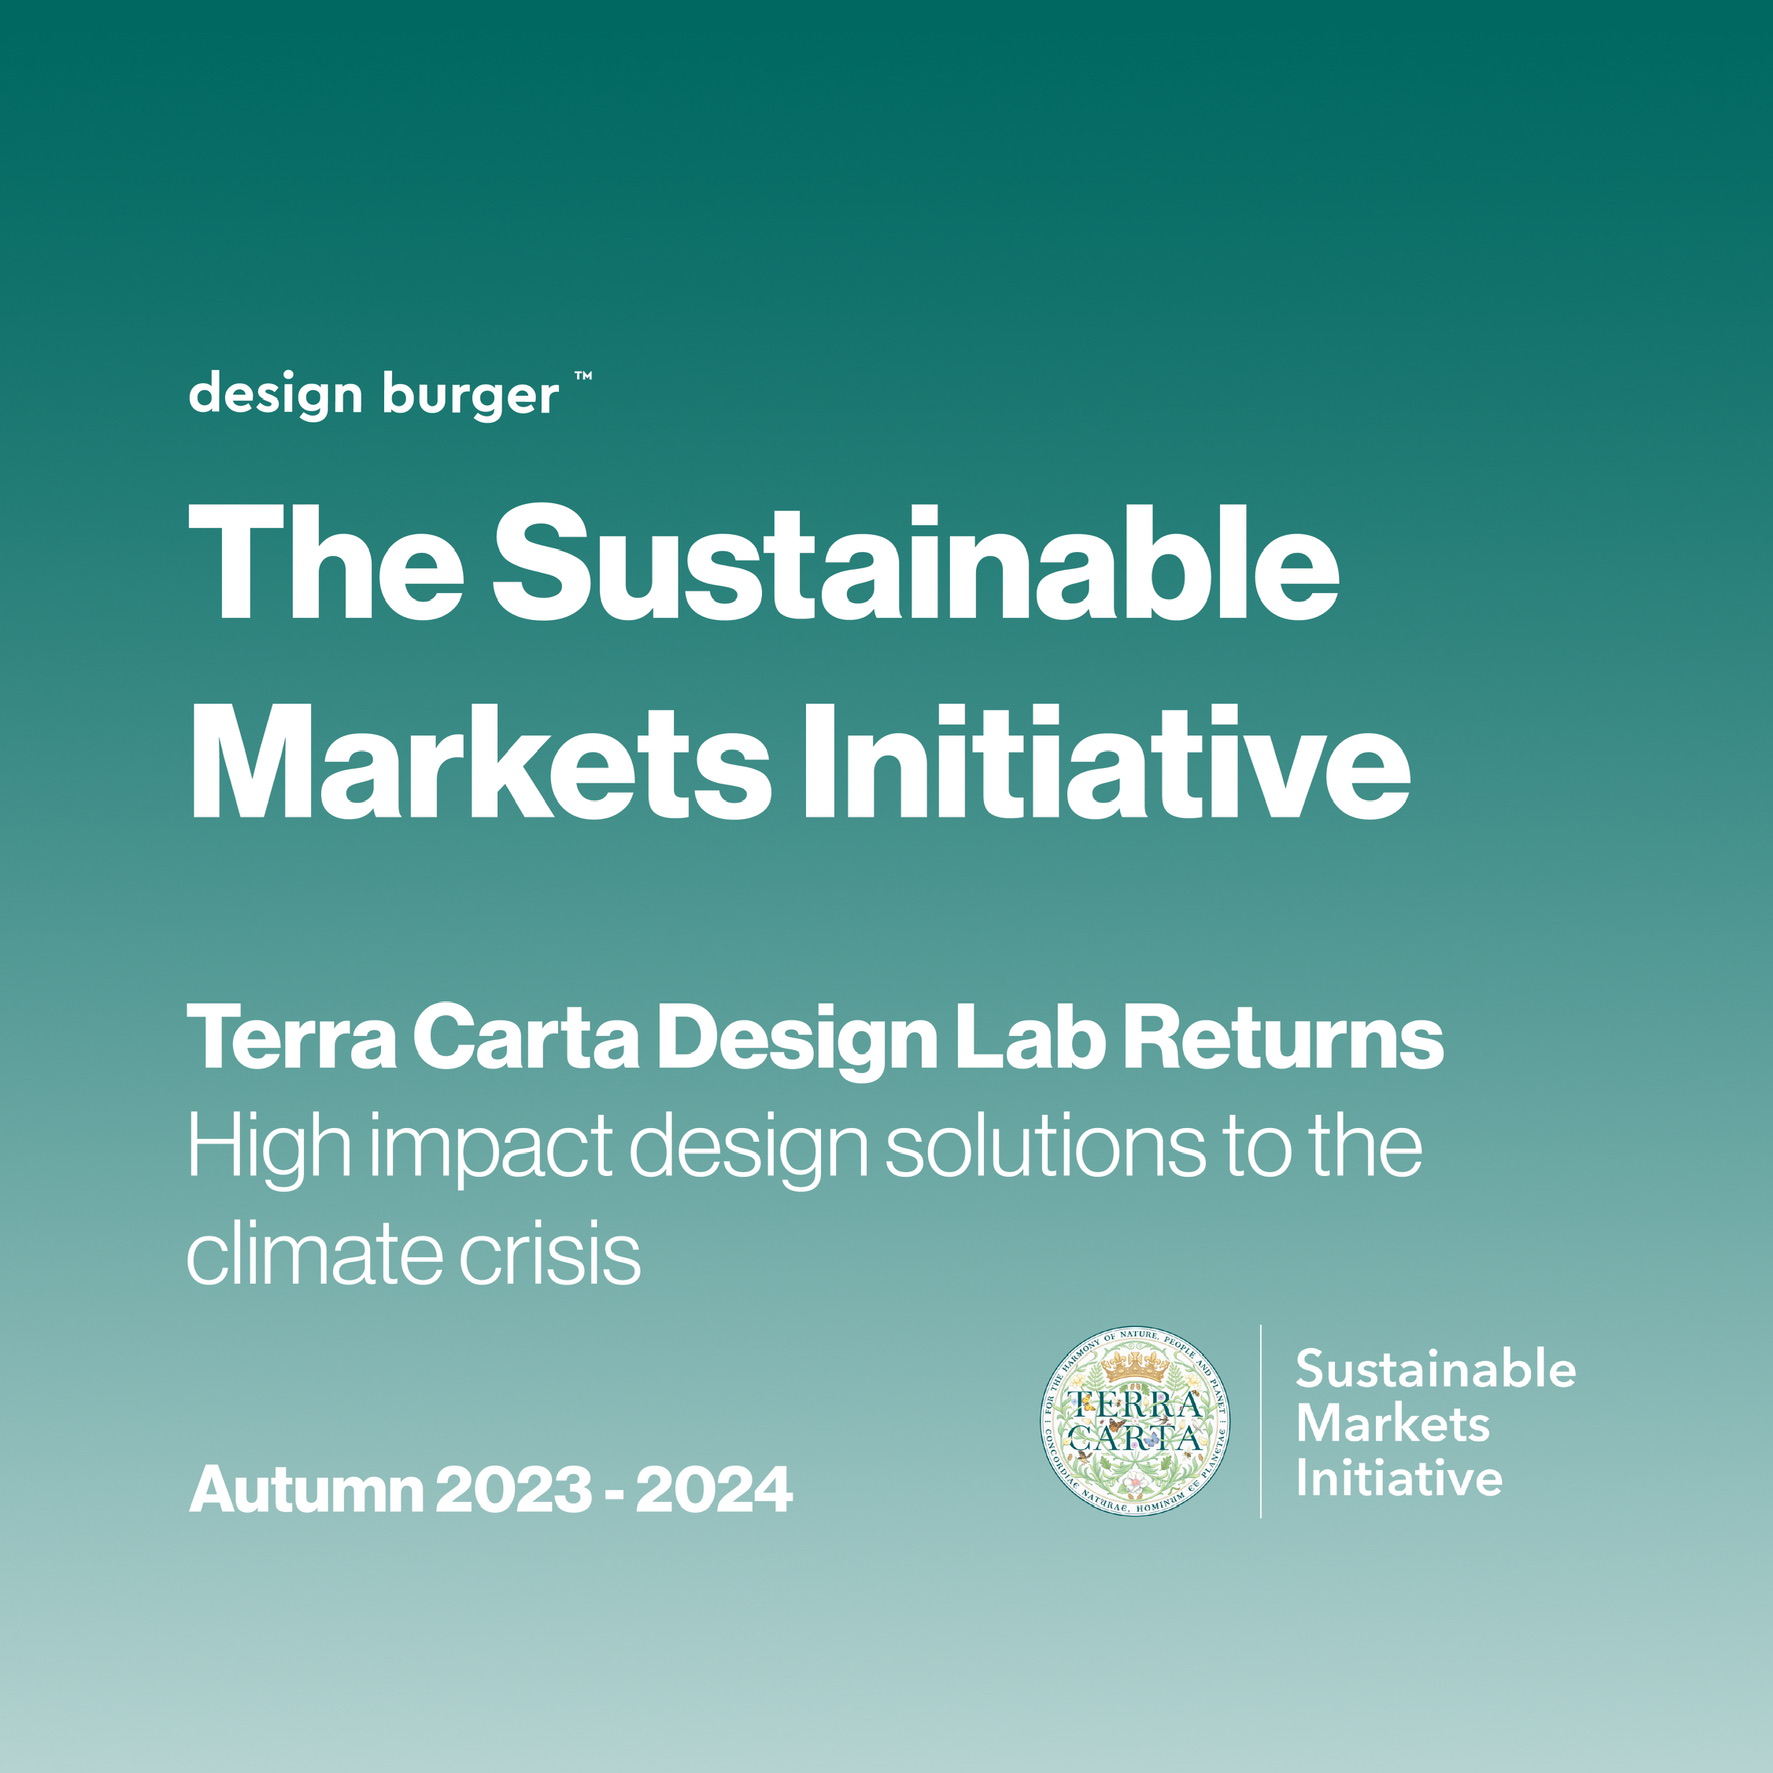 The Sustainable Markets Initiative’s